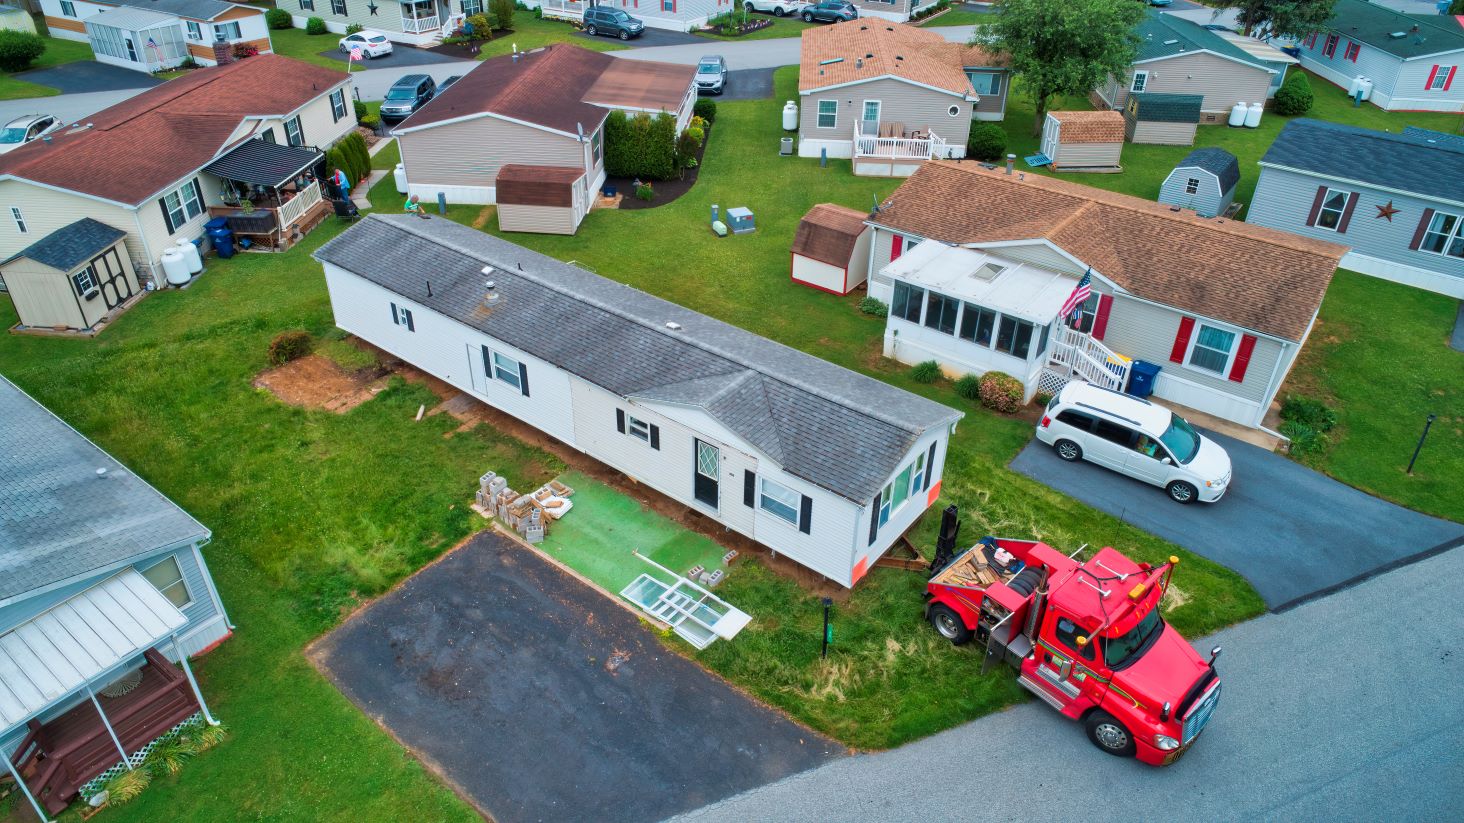 Modular Homes vs Manufactured Homes: What’s the Difference?